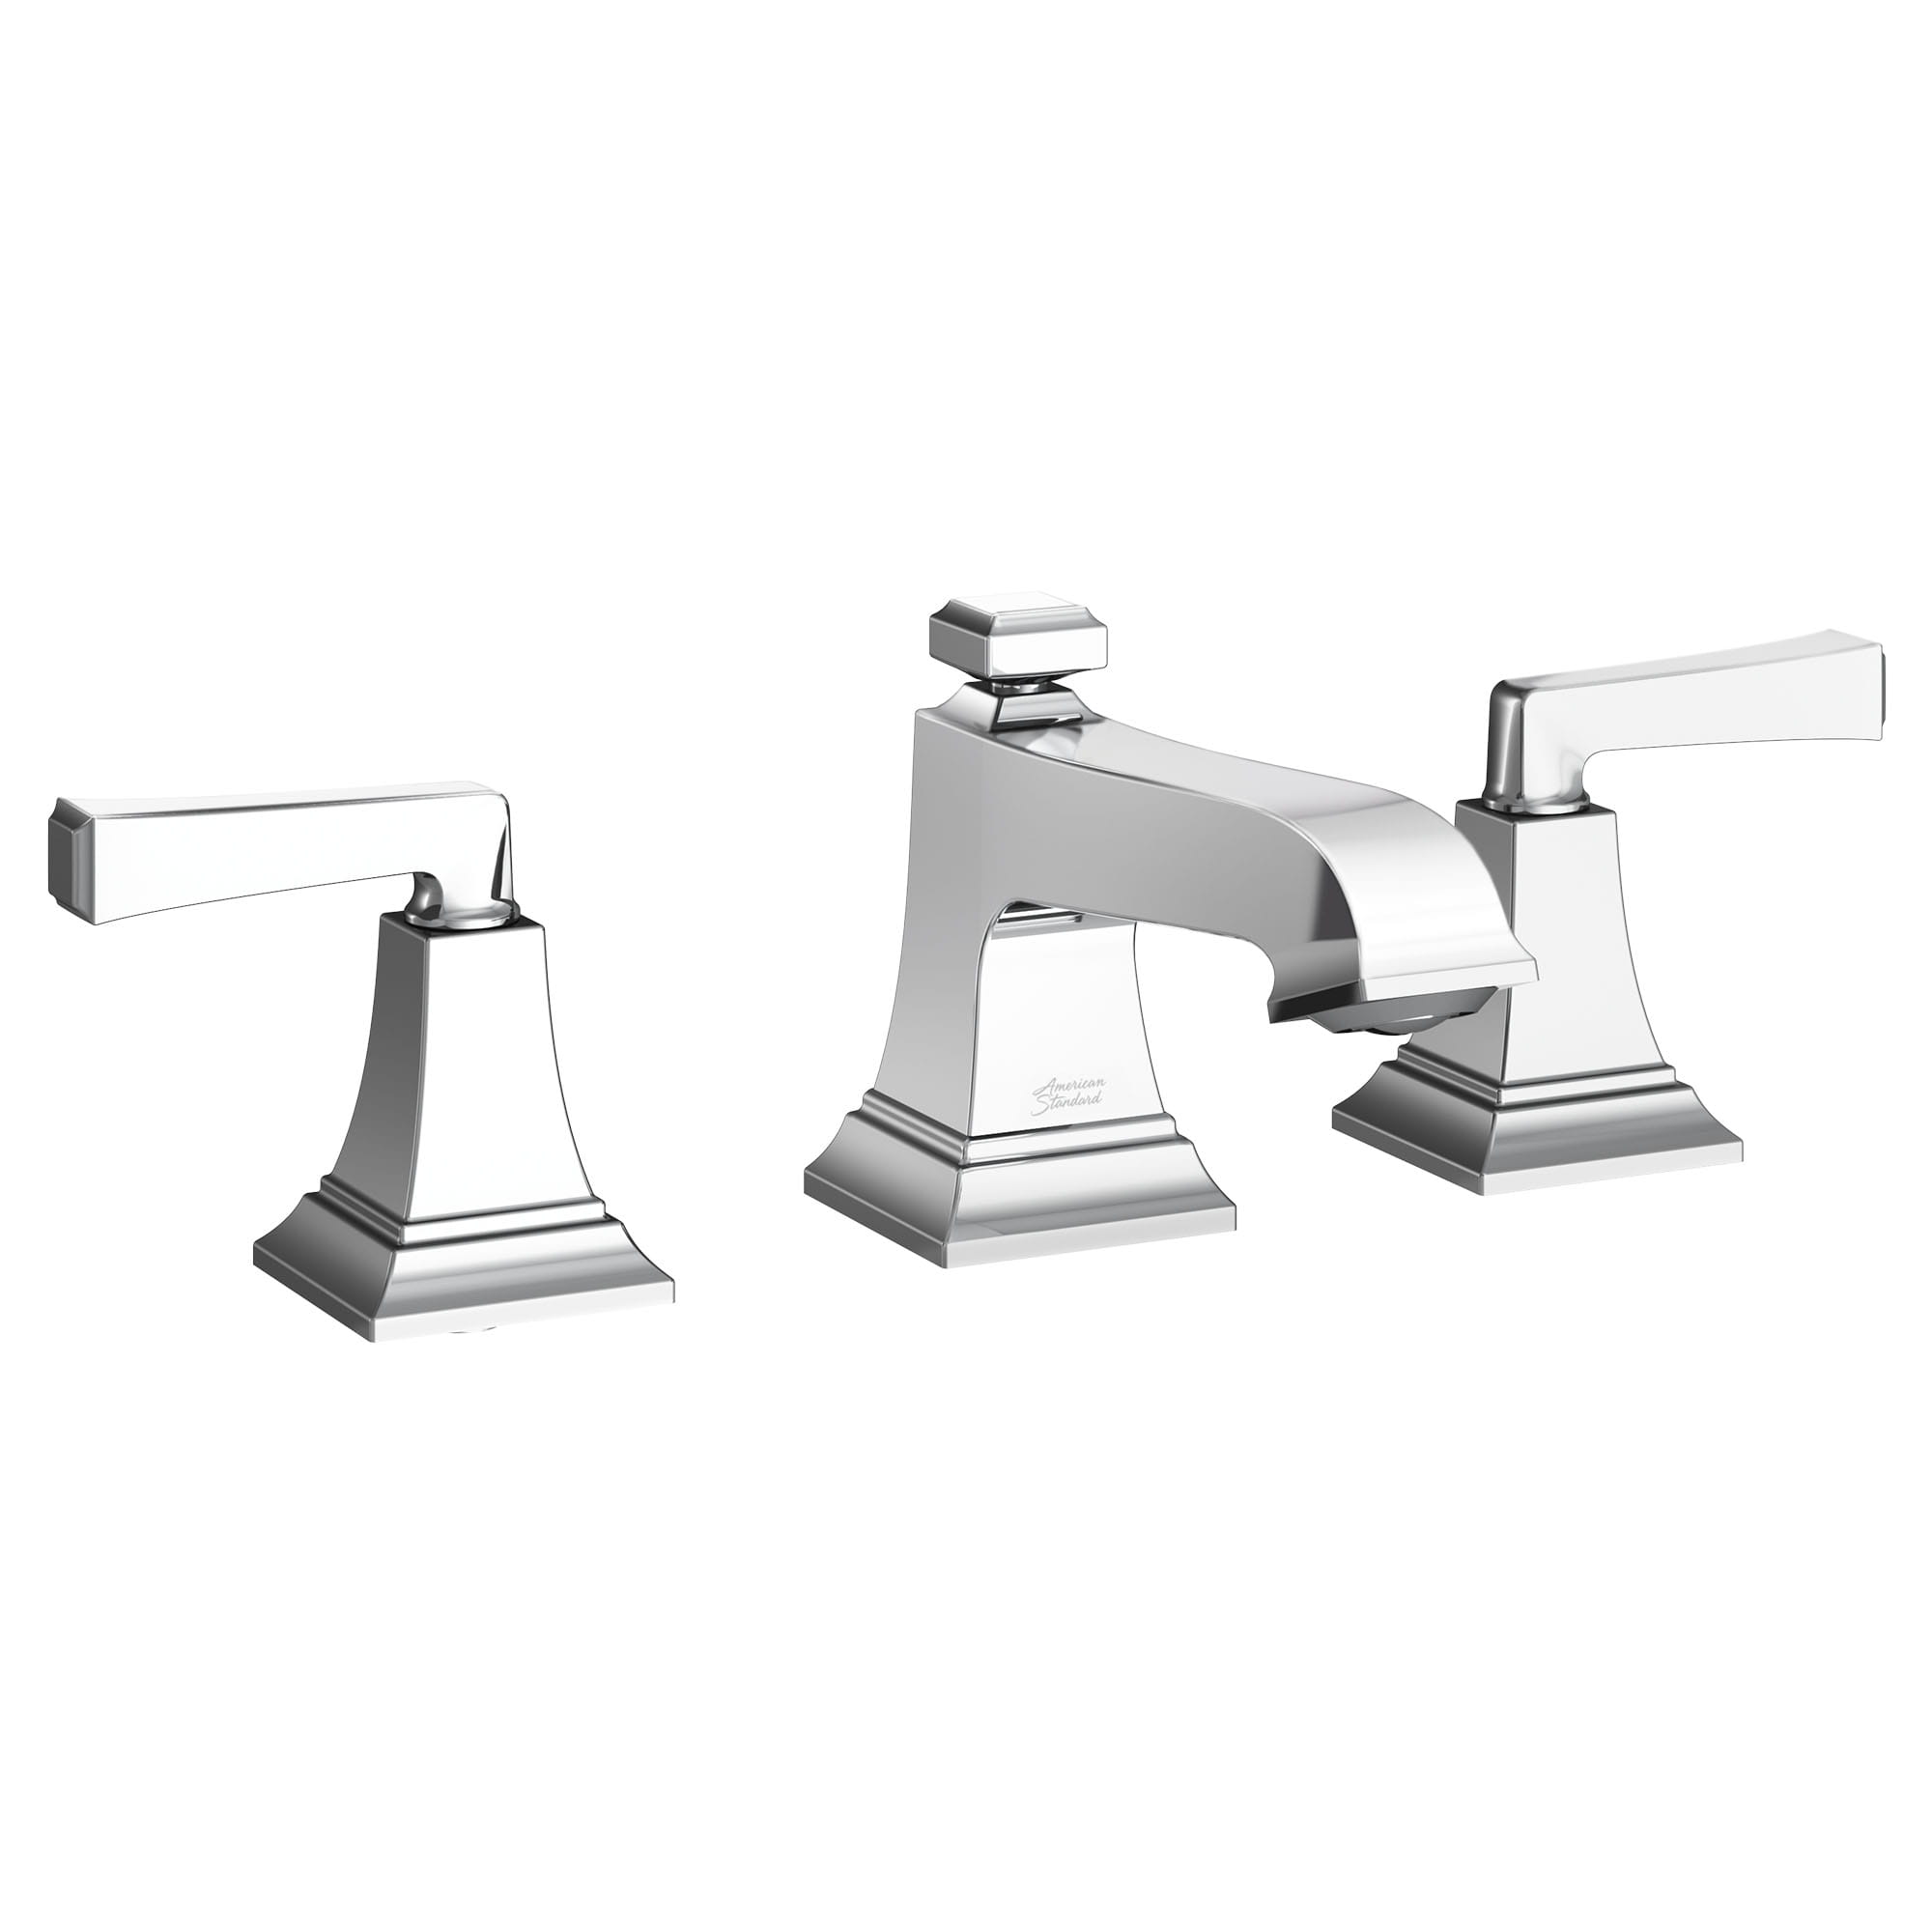 Town Square S 8 Inch Widespread 2 Handle Bathroom Faucet 12 gpm 45 L min With Lever Handles CHROME